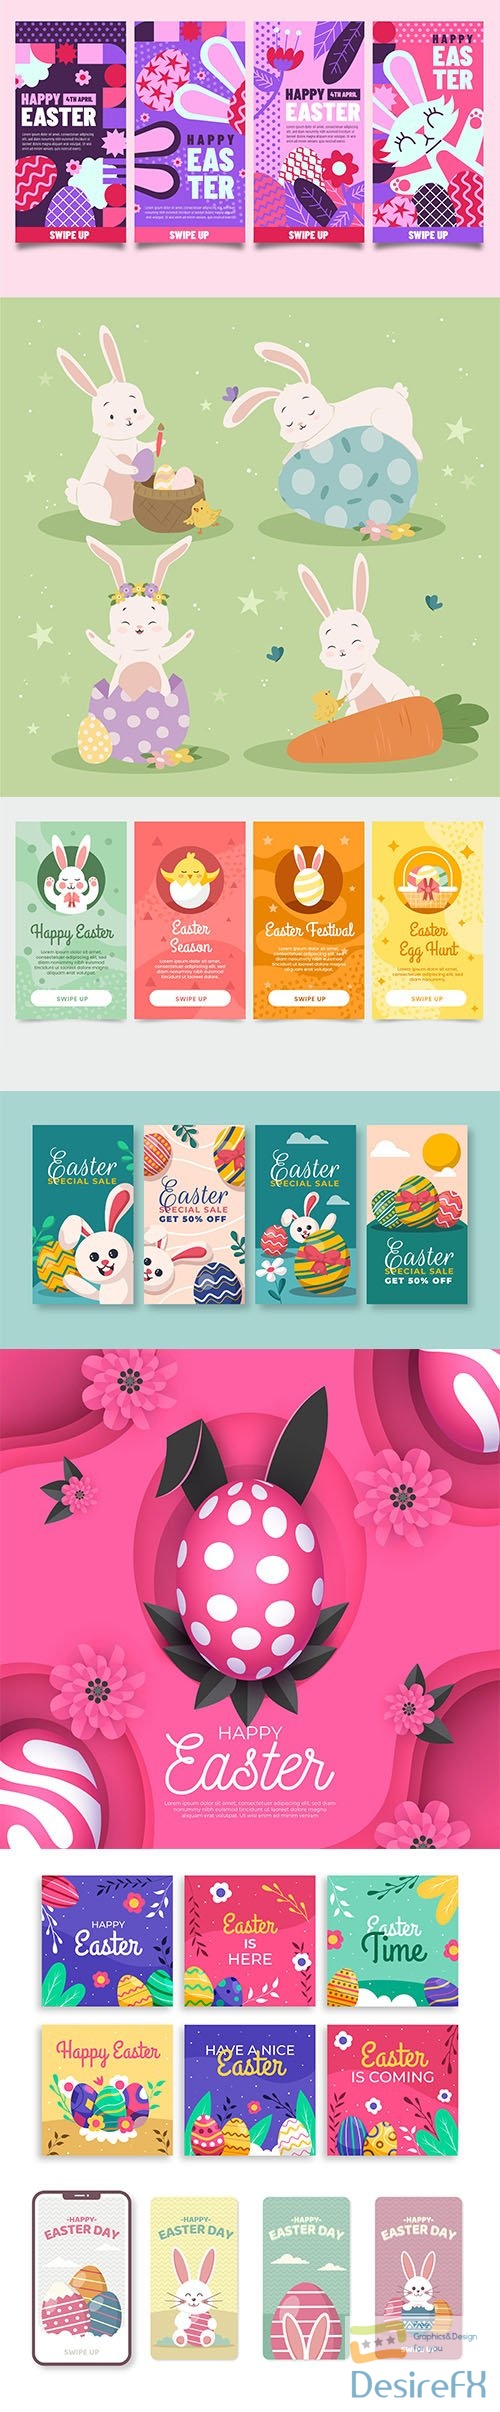 Hand-drawn cute easter illustrations and banner vol 2